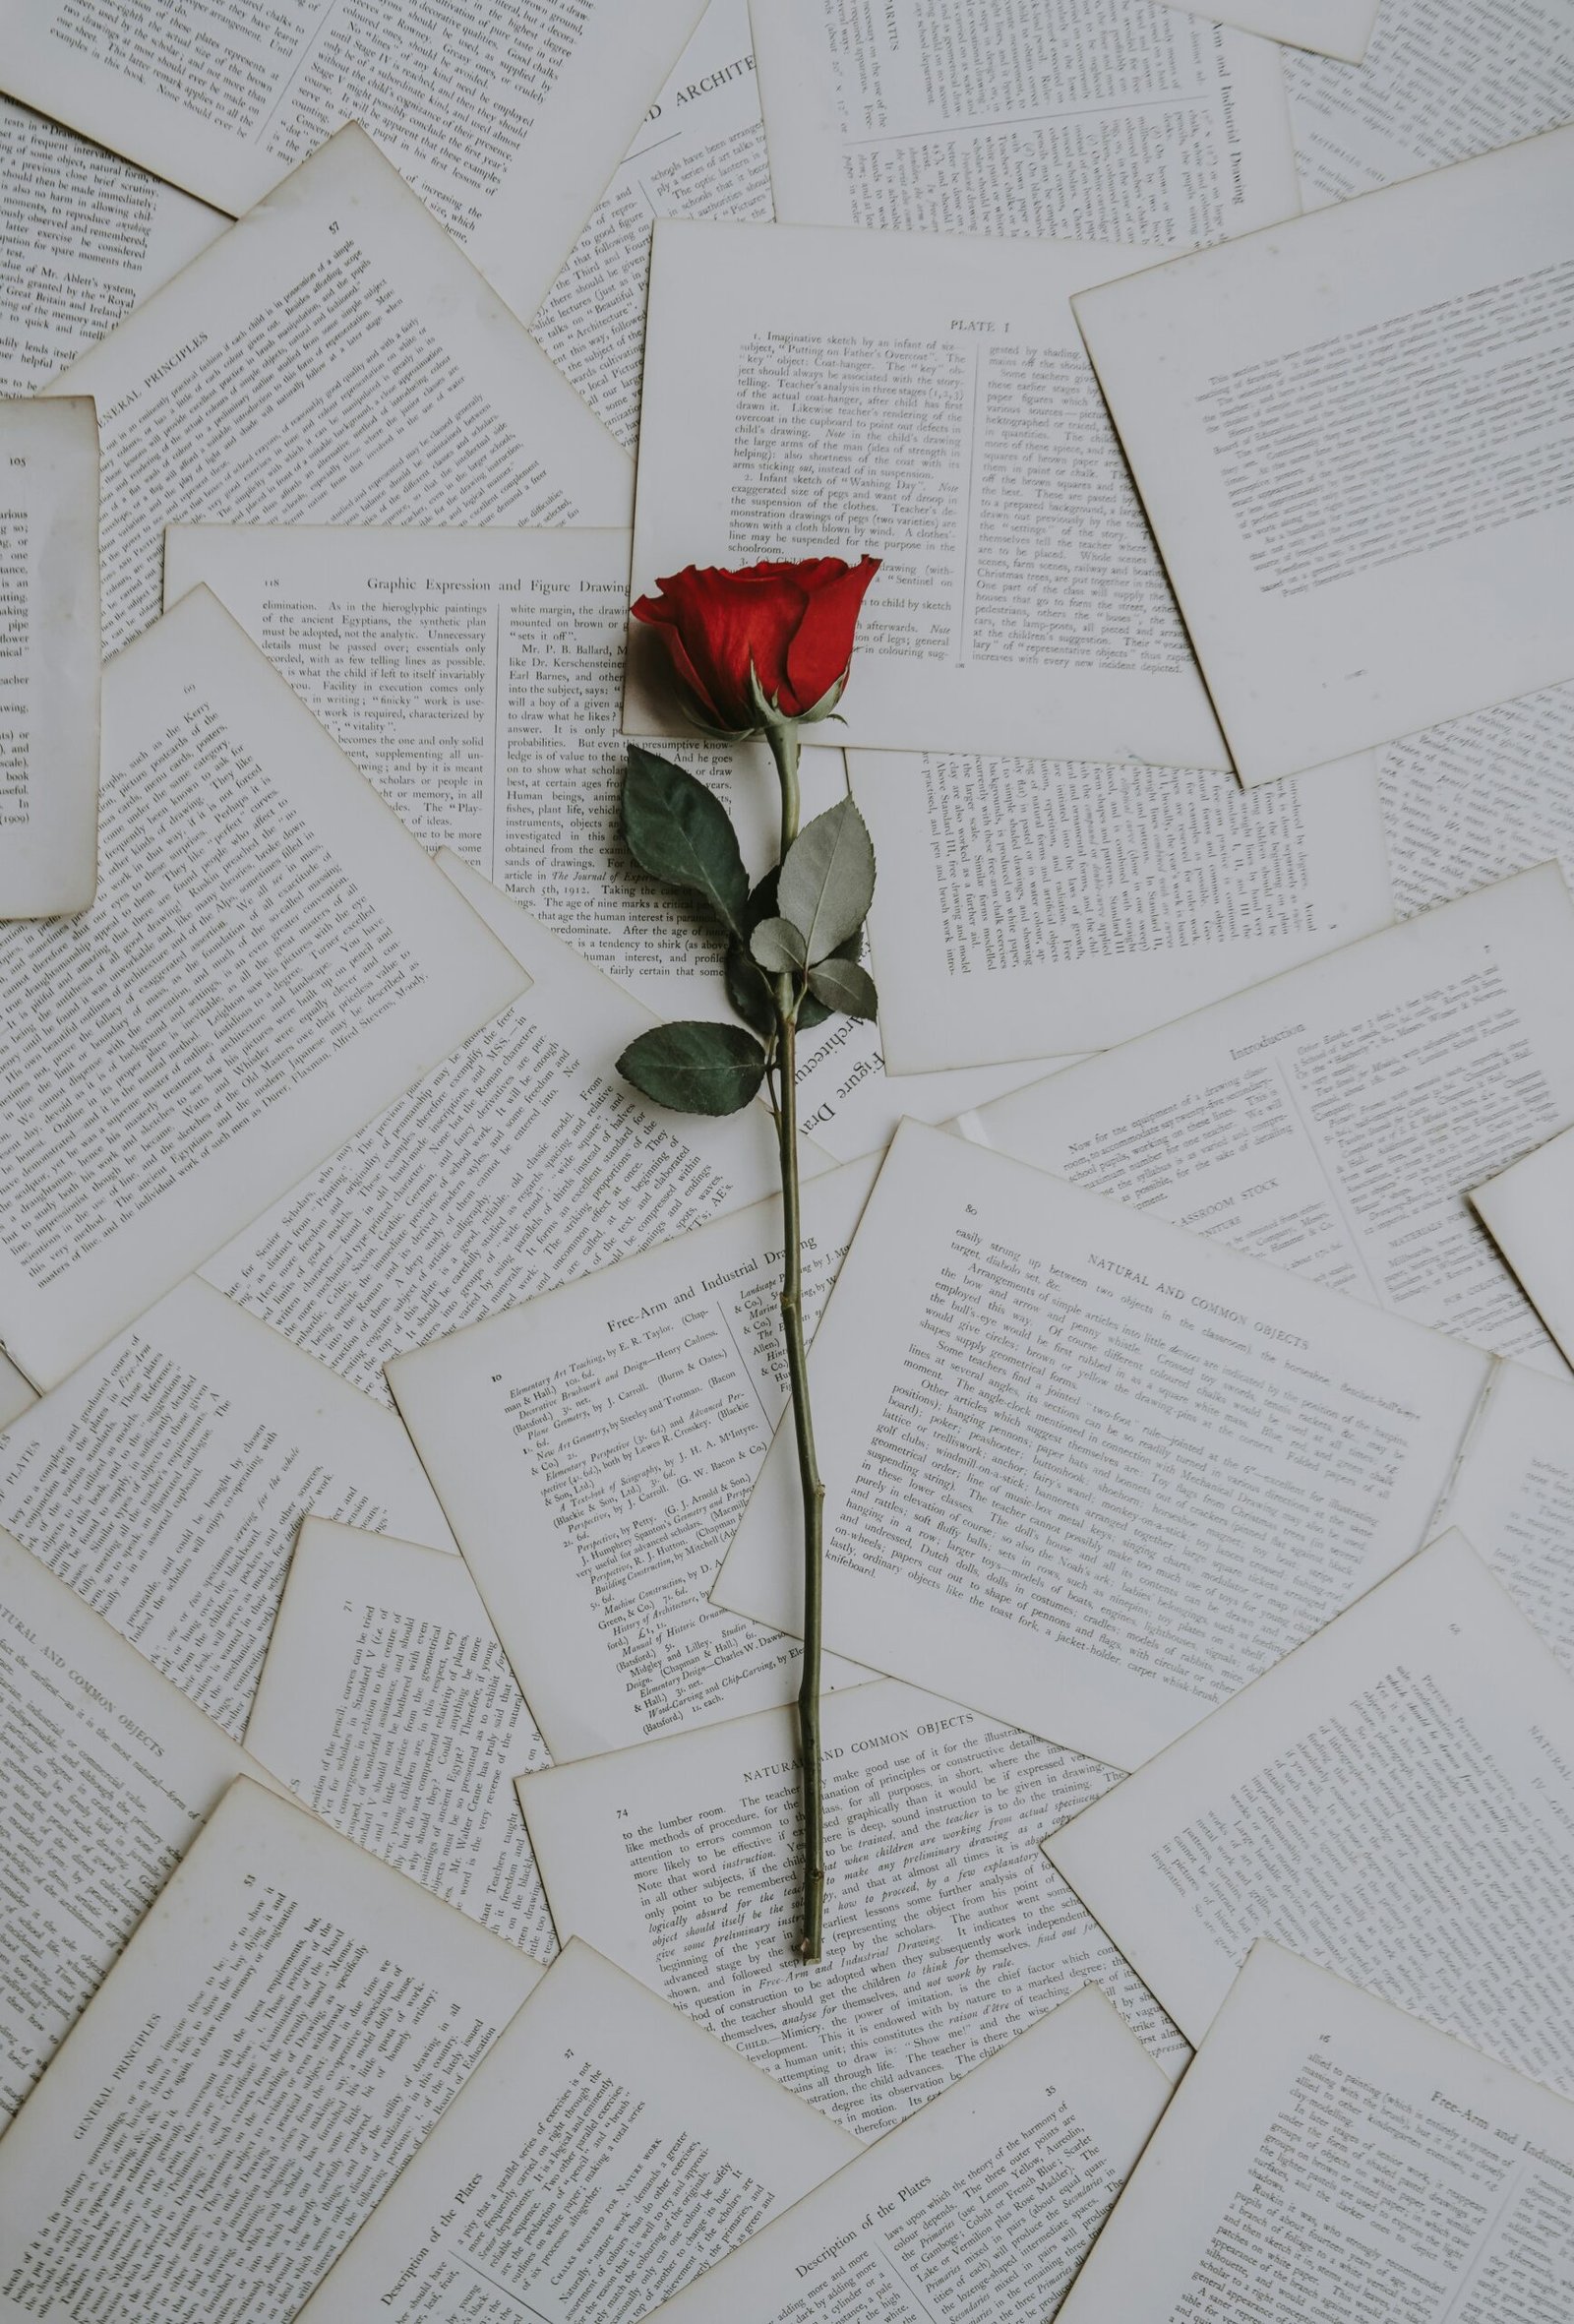 red rose on book sheets